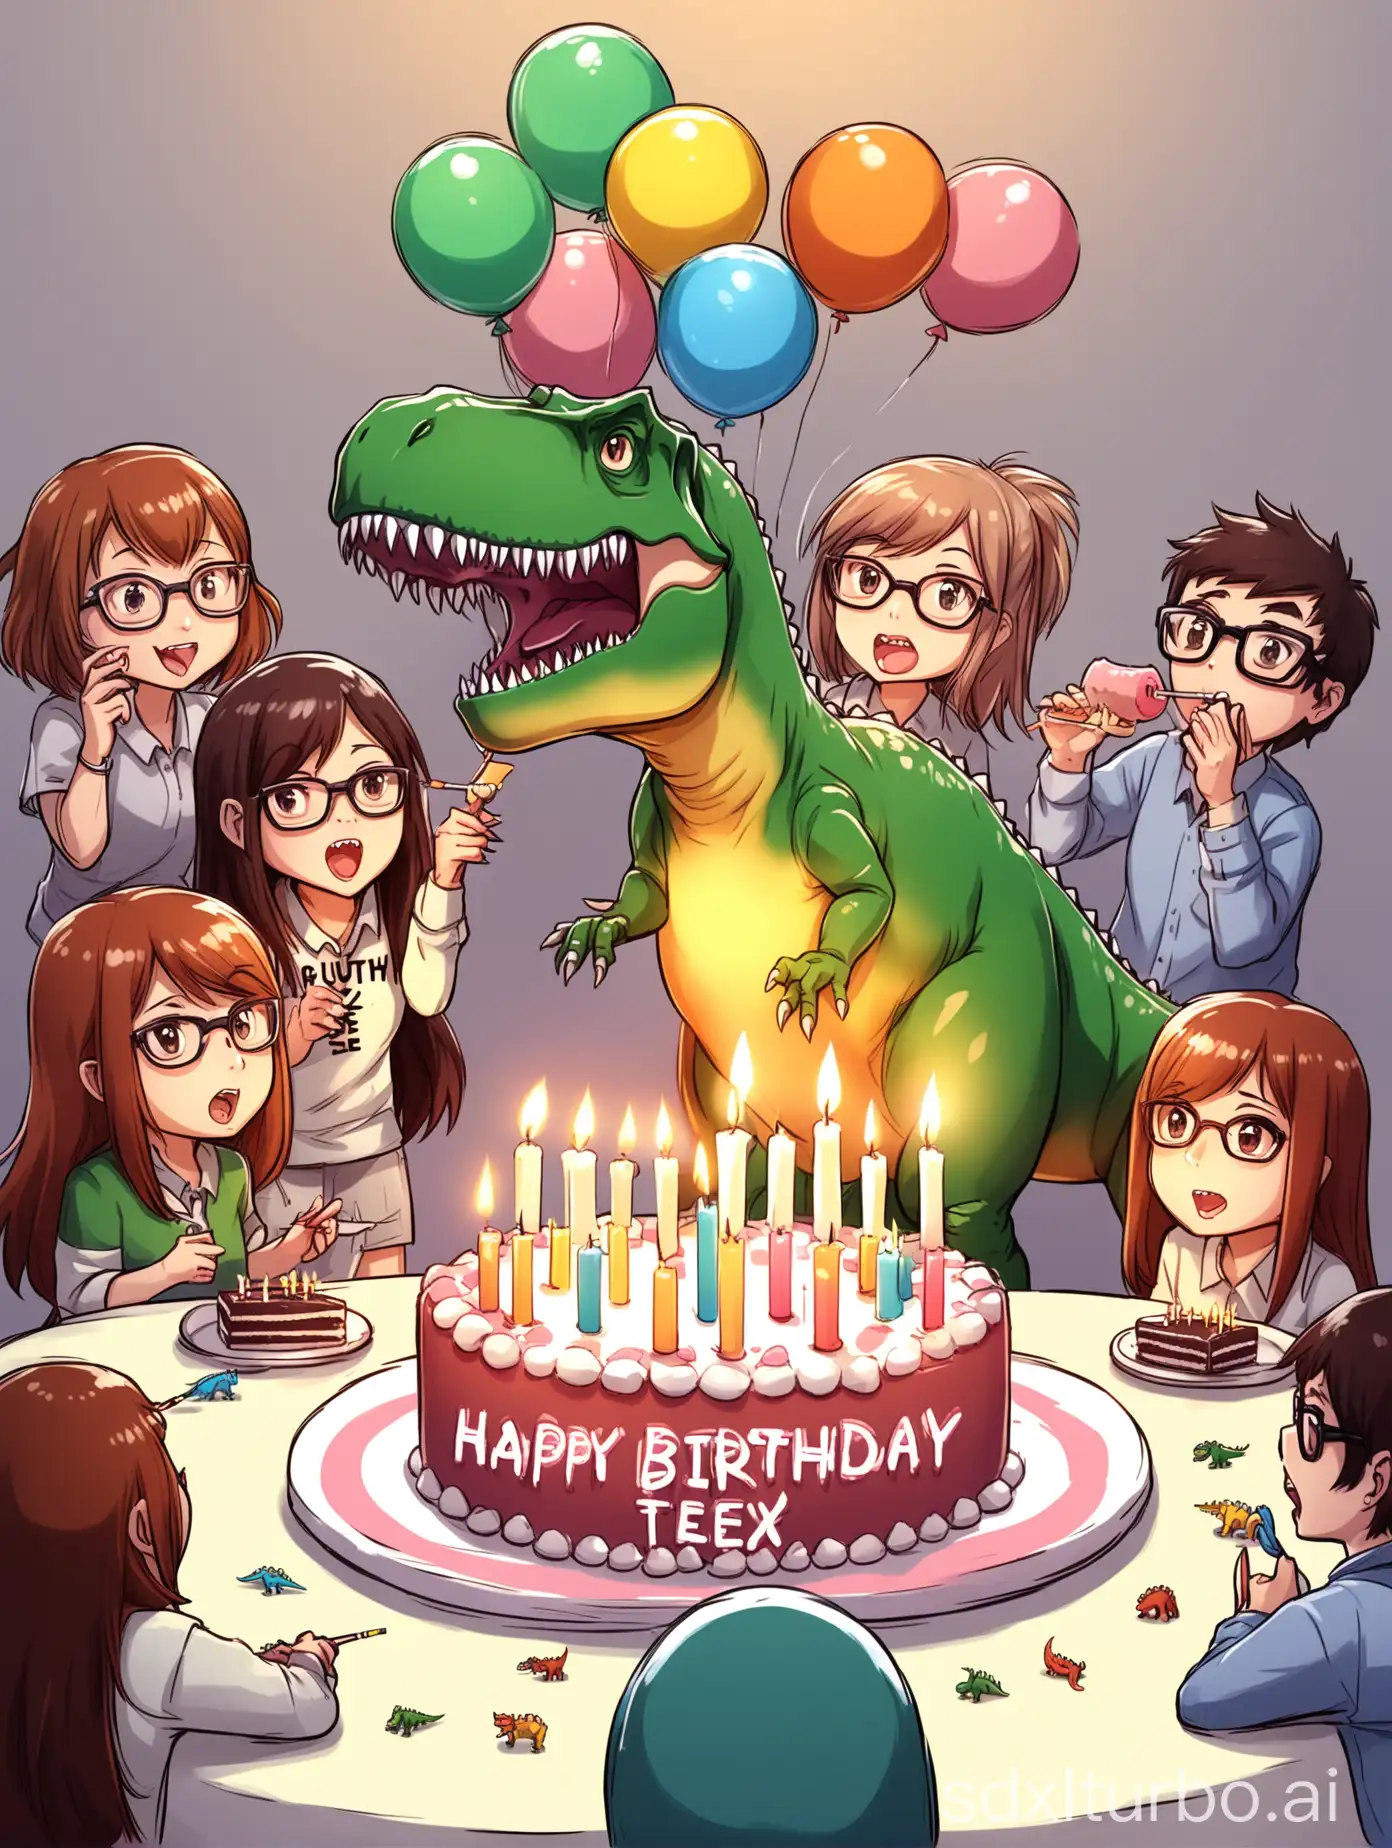 Kawaii-TRex-Female-Blowing-Out-Birthday-Cake-Candle-with-Geek-Friends